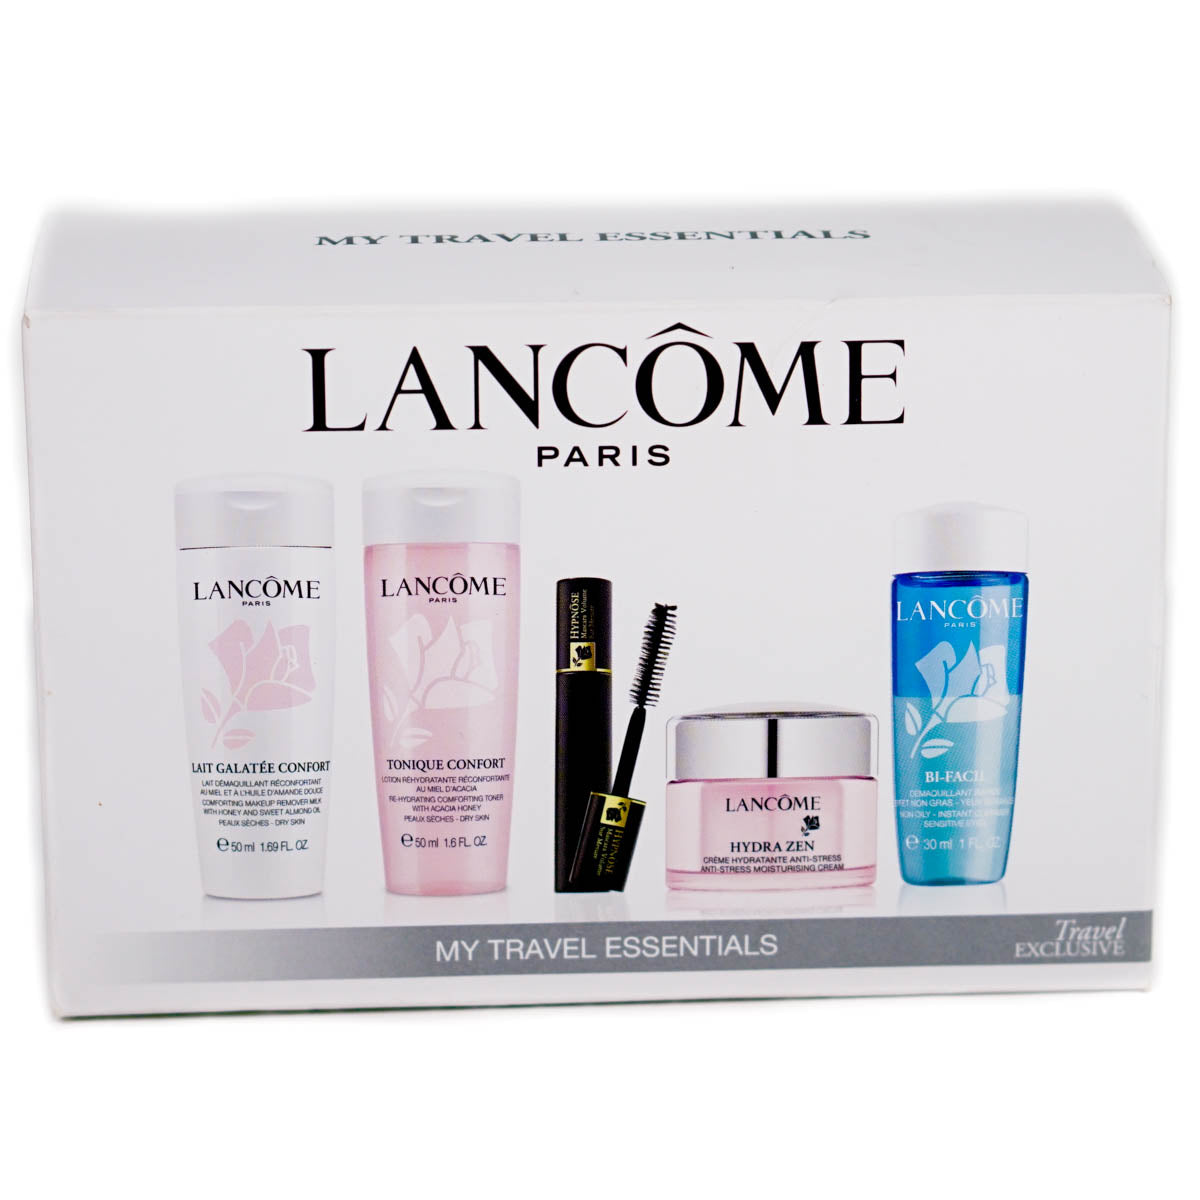 Lancome Must Have Travel Set Essentials Makeup Skincare (Clearance)